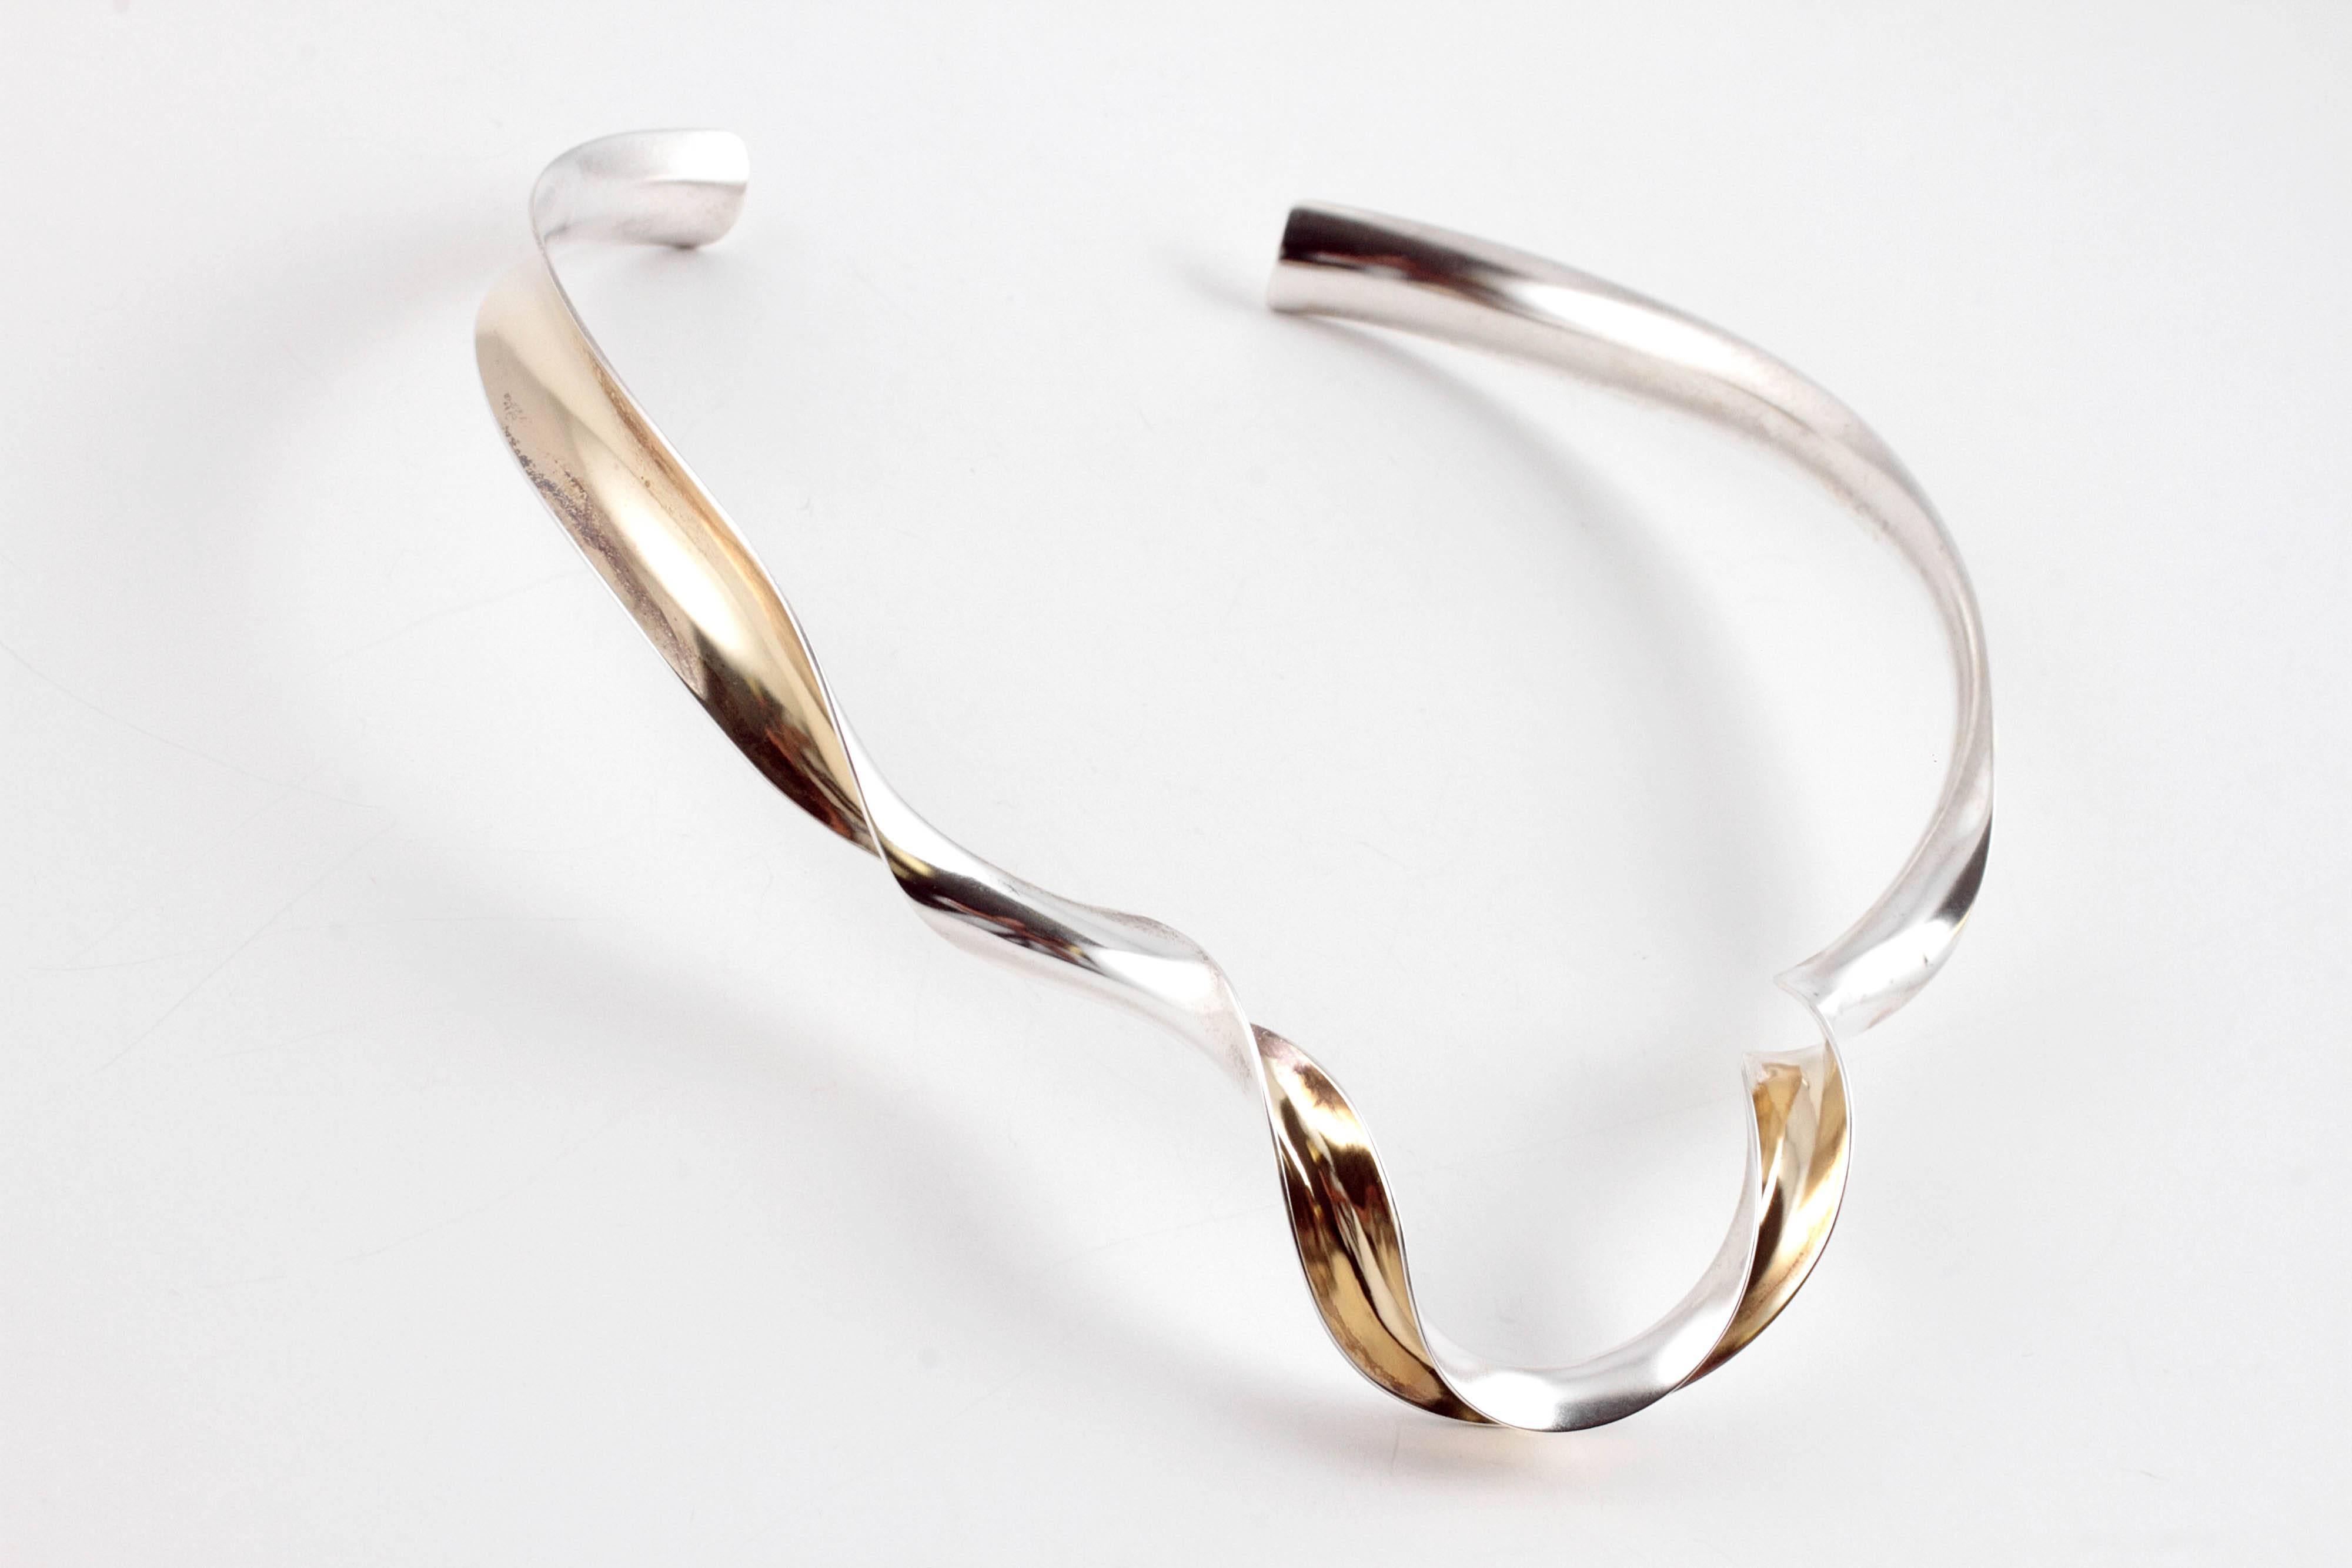 In 18 karat yellow gold and sterling silver, fun to wear and light on the neck!